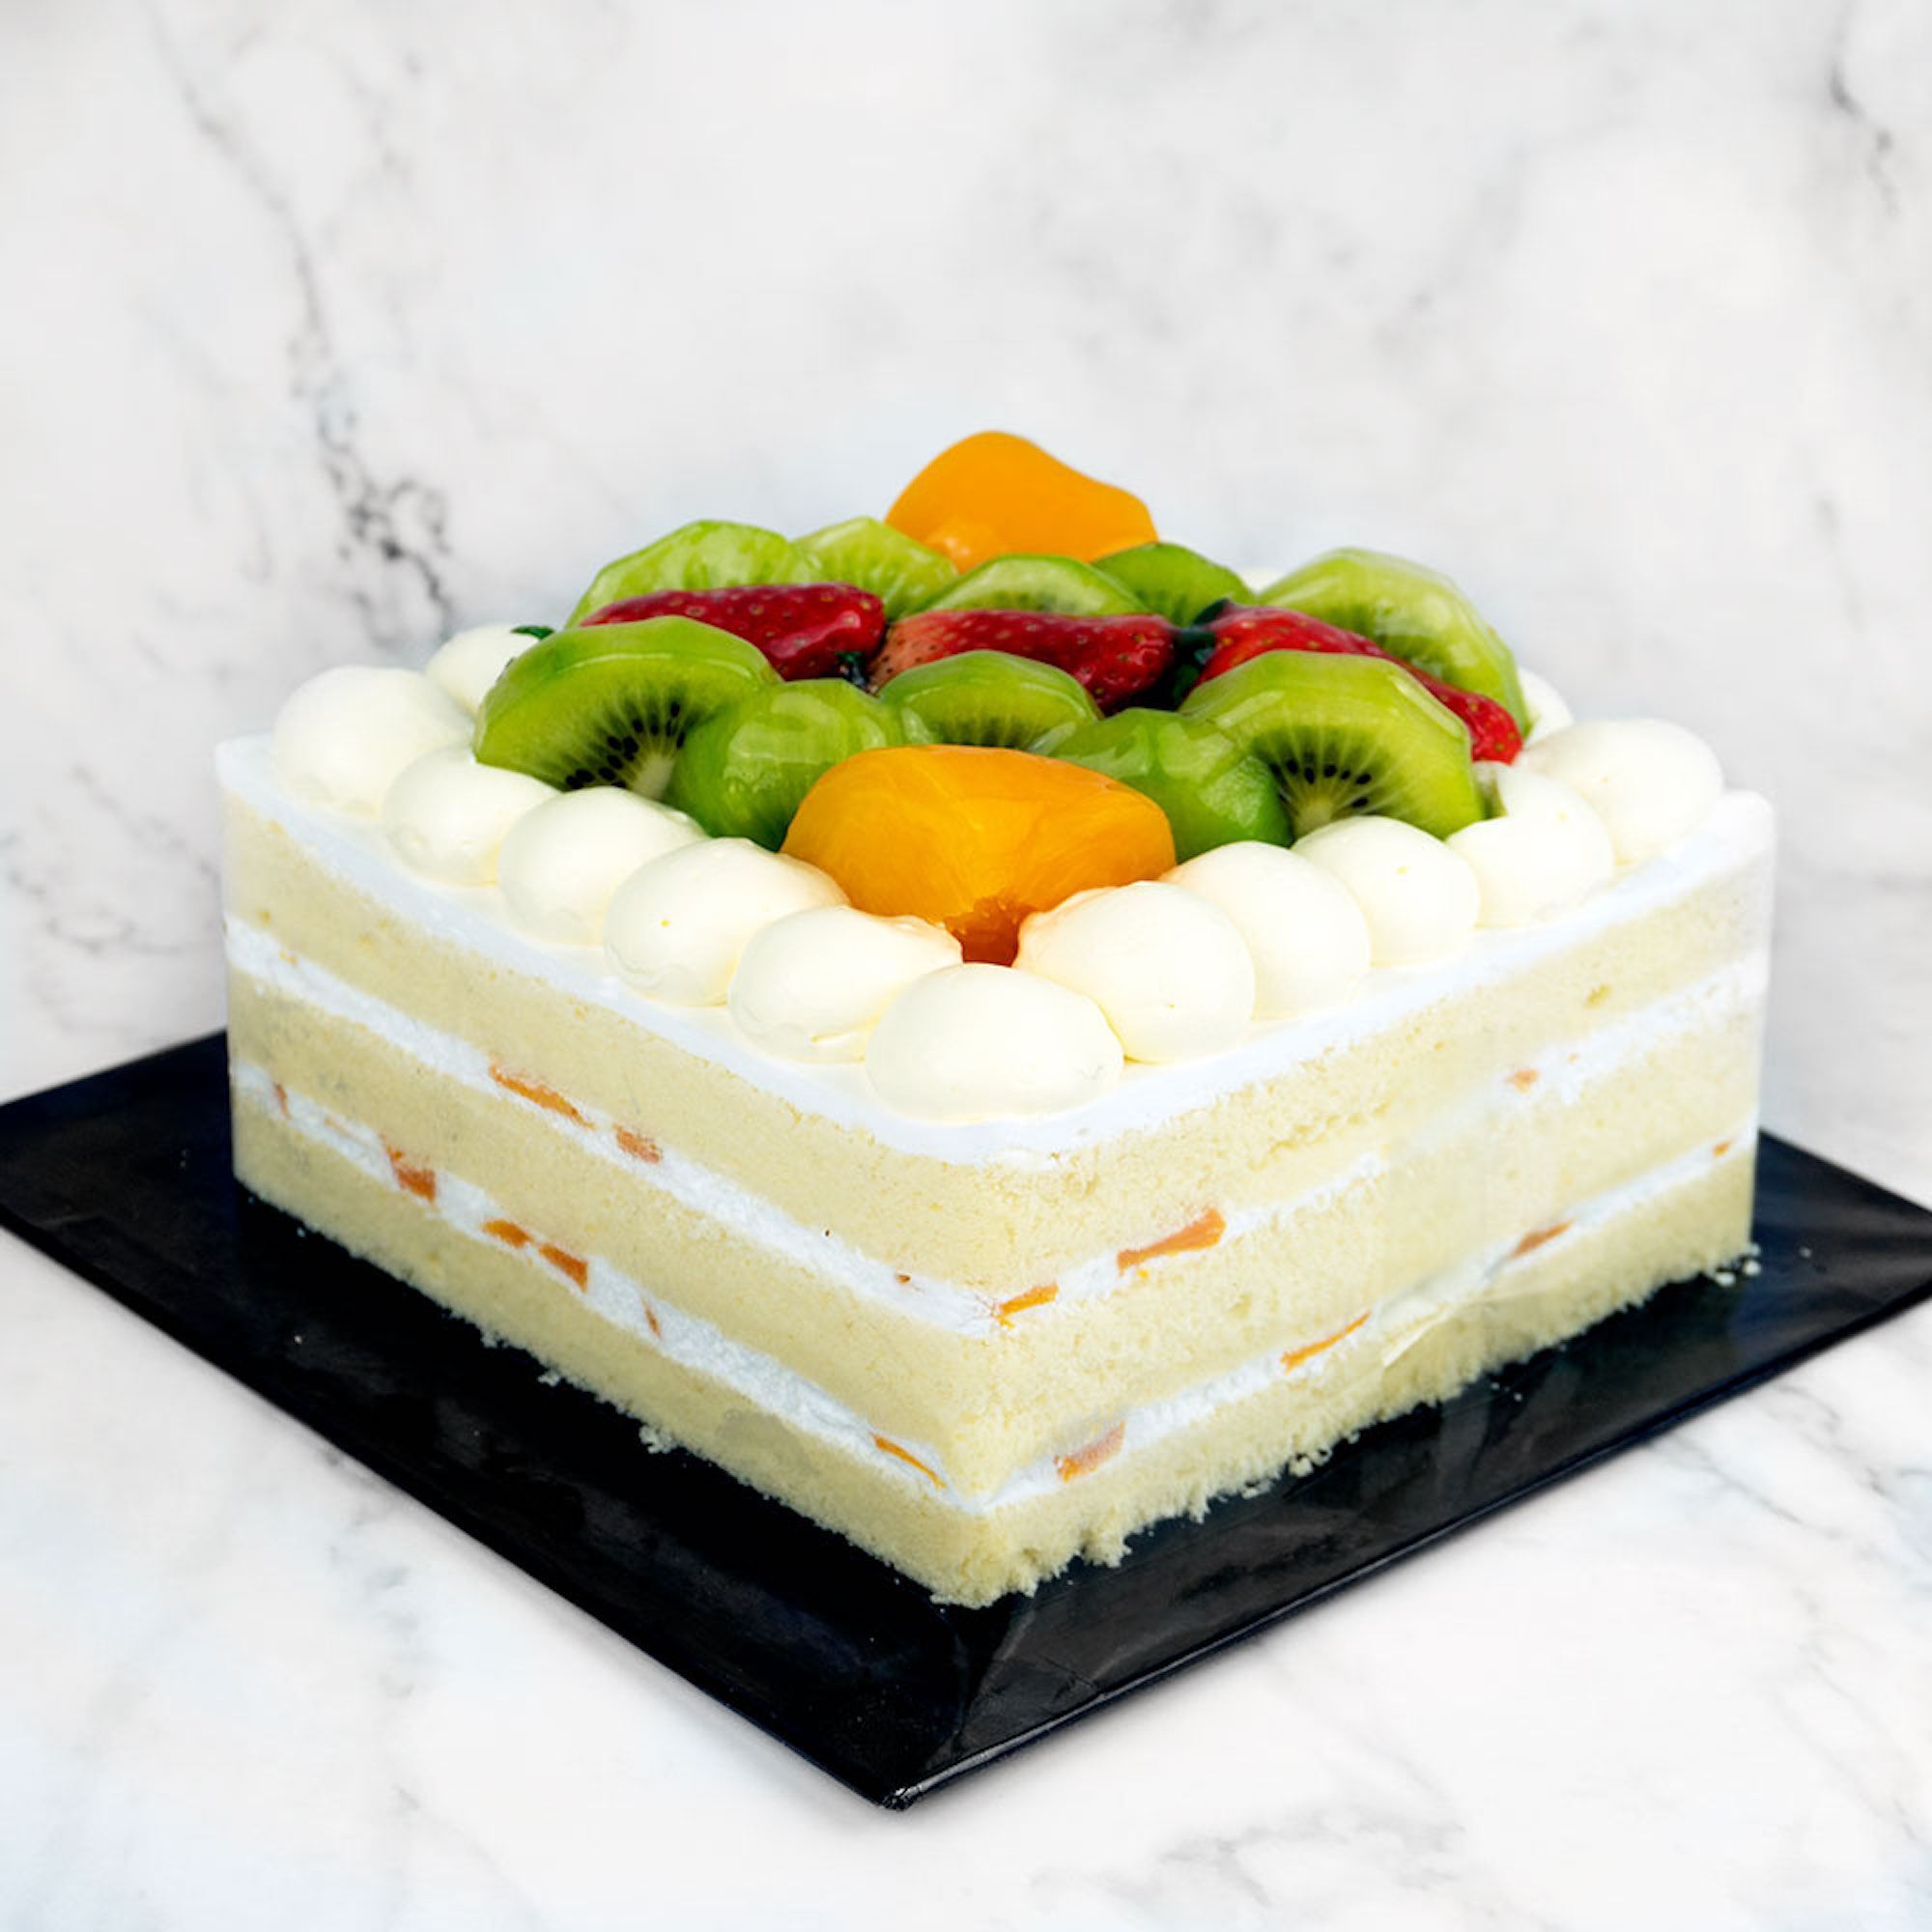 White Fruit Cake. a Large Double-decker Cake. a Birthday Cake Covered with  Cream and Fruit Stock Image - Image of doubledecker, whipped: 176790013